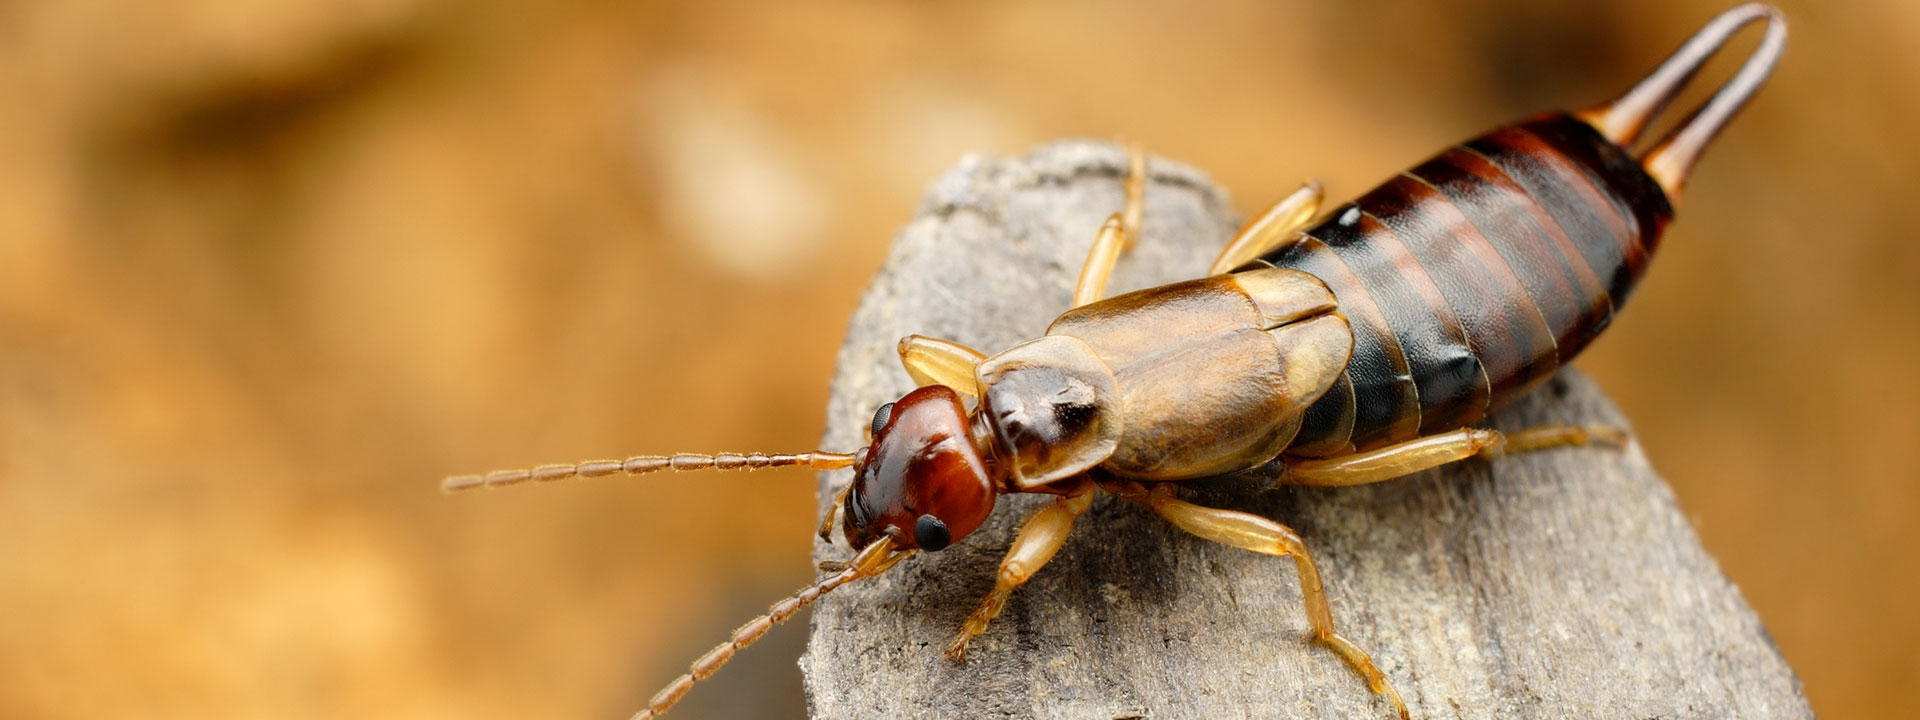 A closeup of an Earwig on the tip of a log.